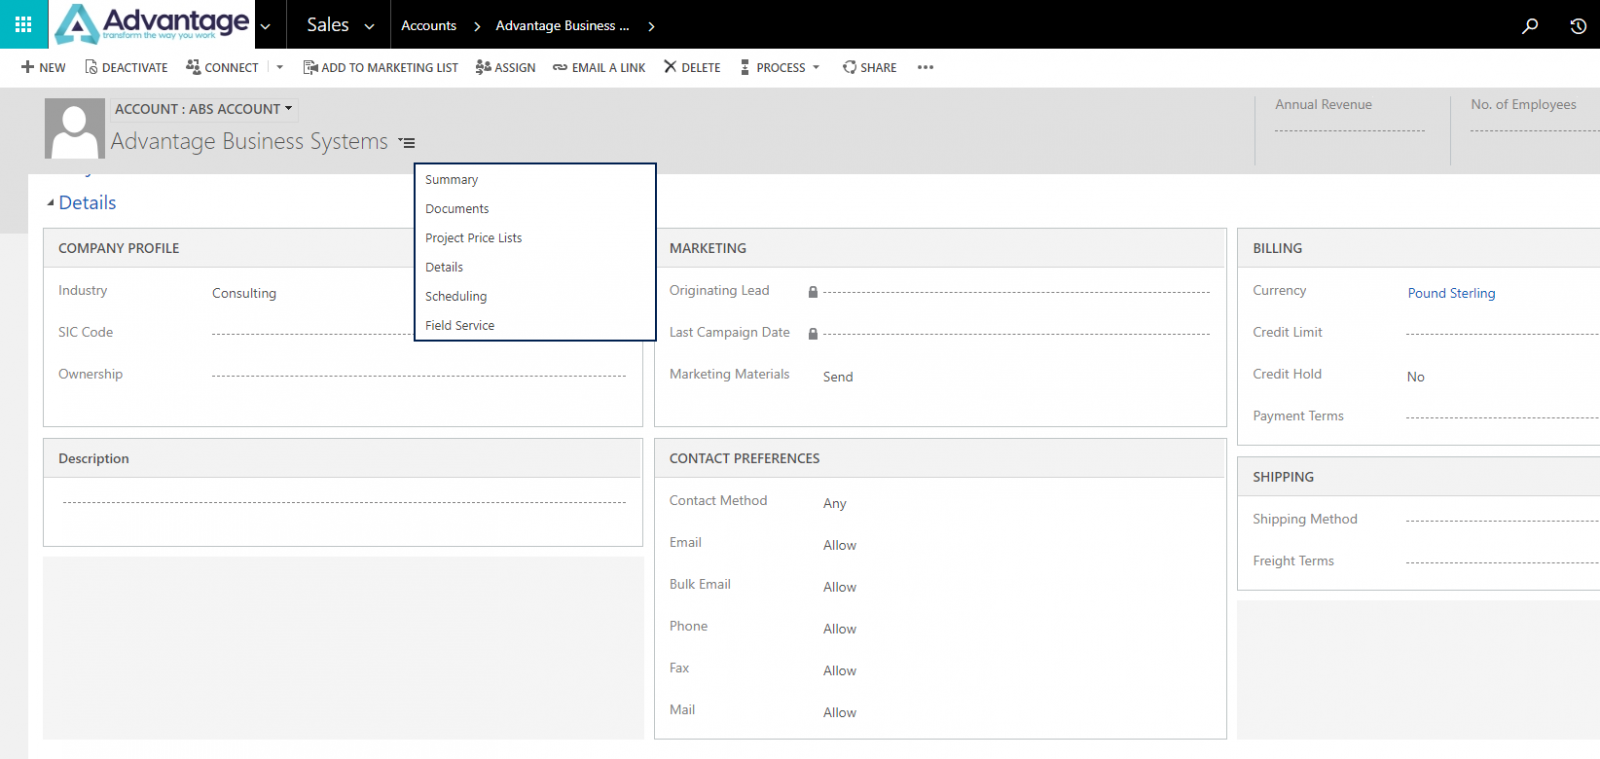 Tabs vs sections in Dynamics 365